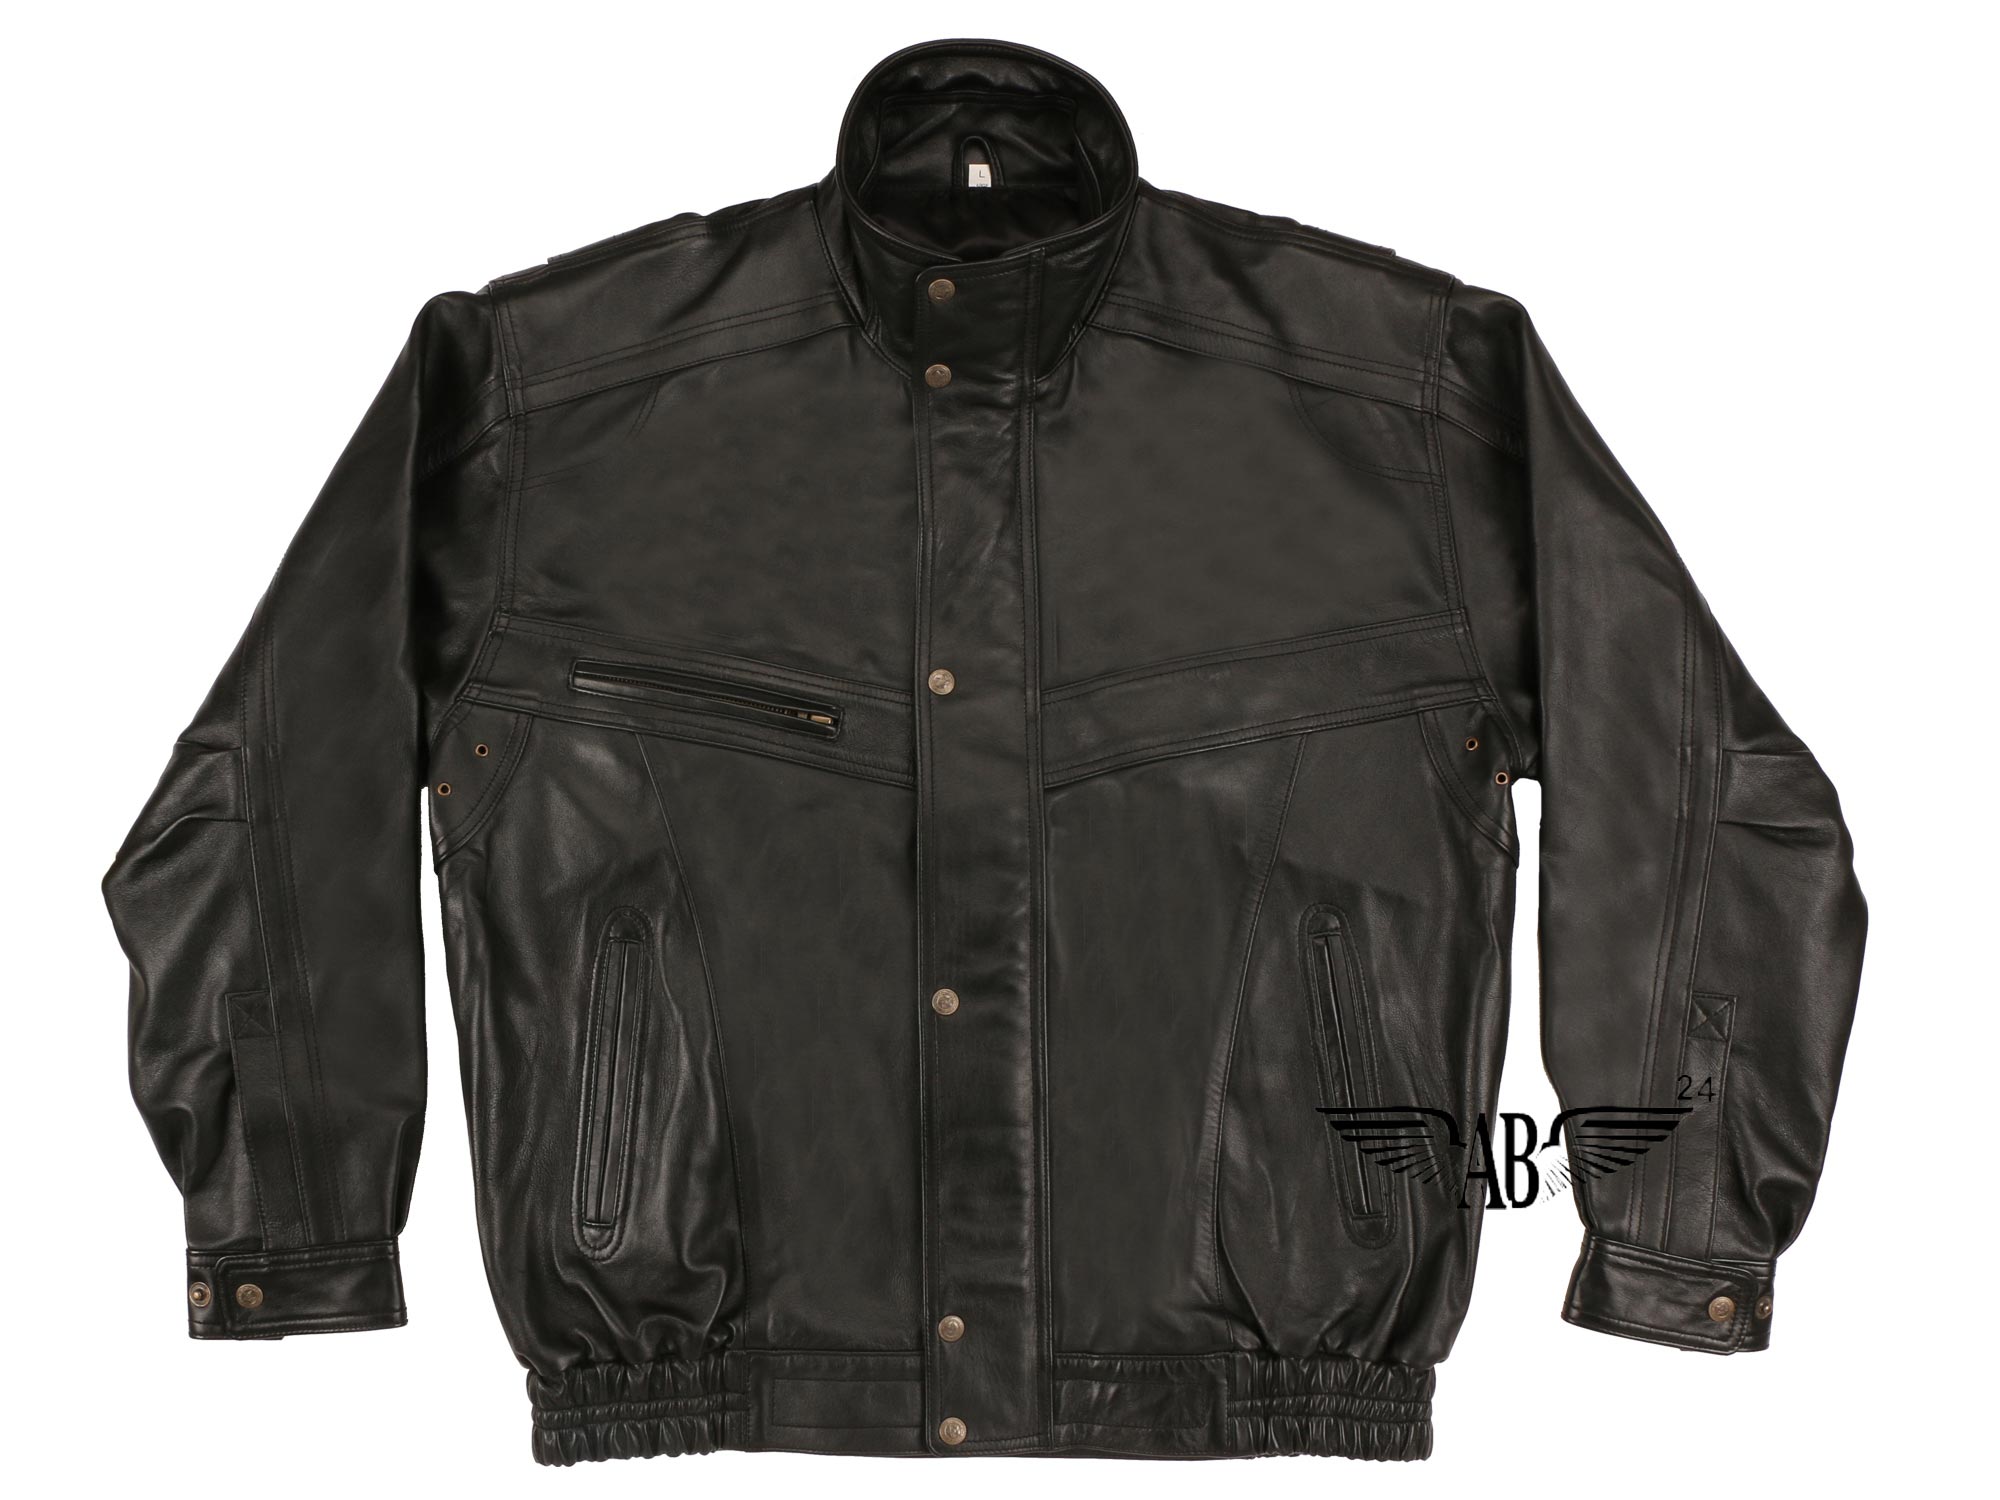 Front side of bomber jacket displayed. One pocket on chest is visible. Two slit pockets are visible. Jacket hem appears to have excellent fitting.